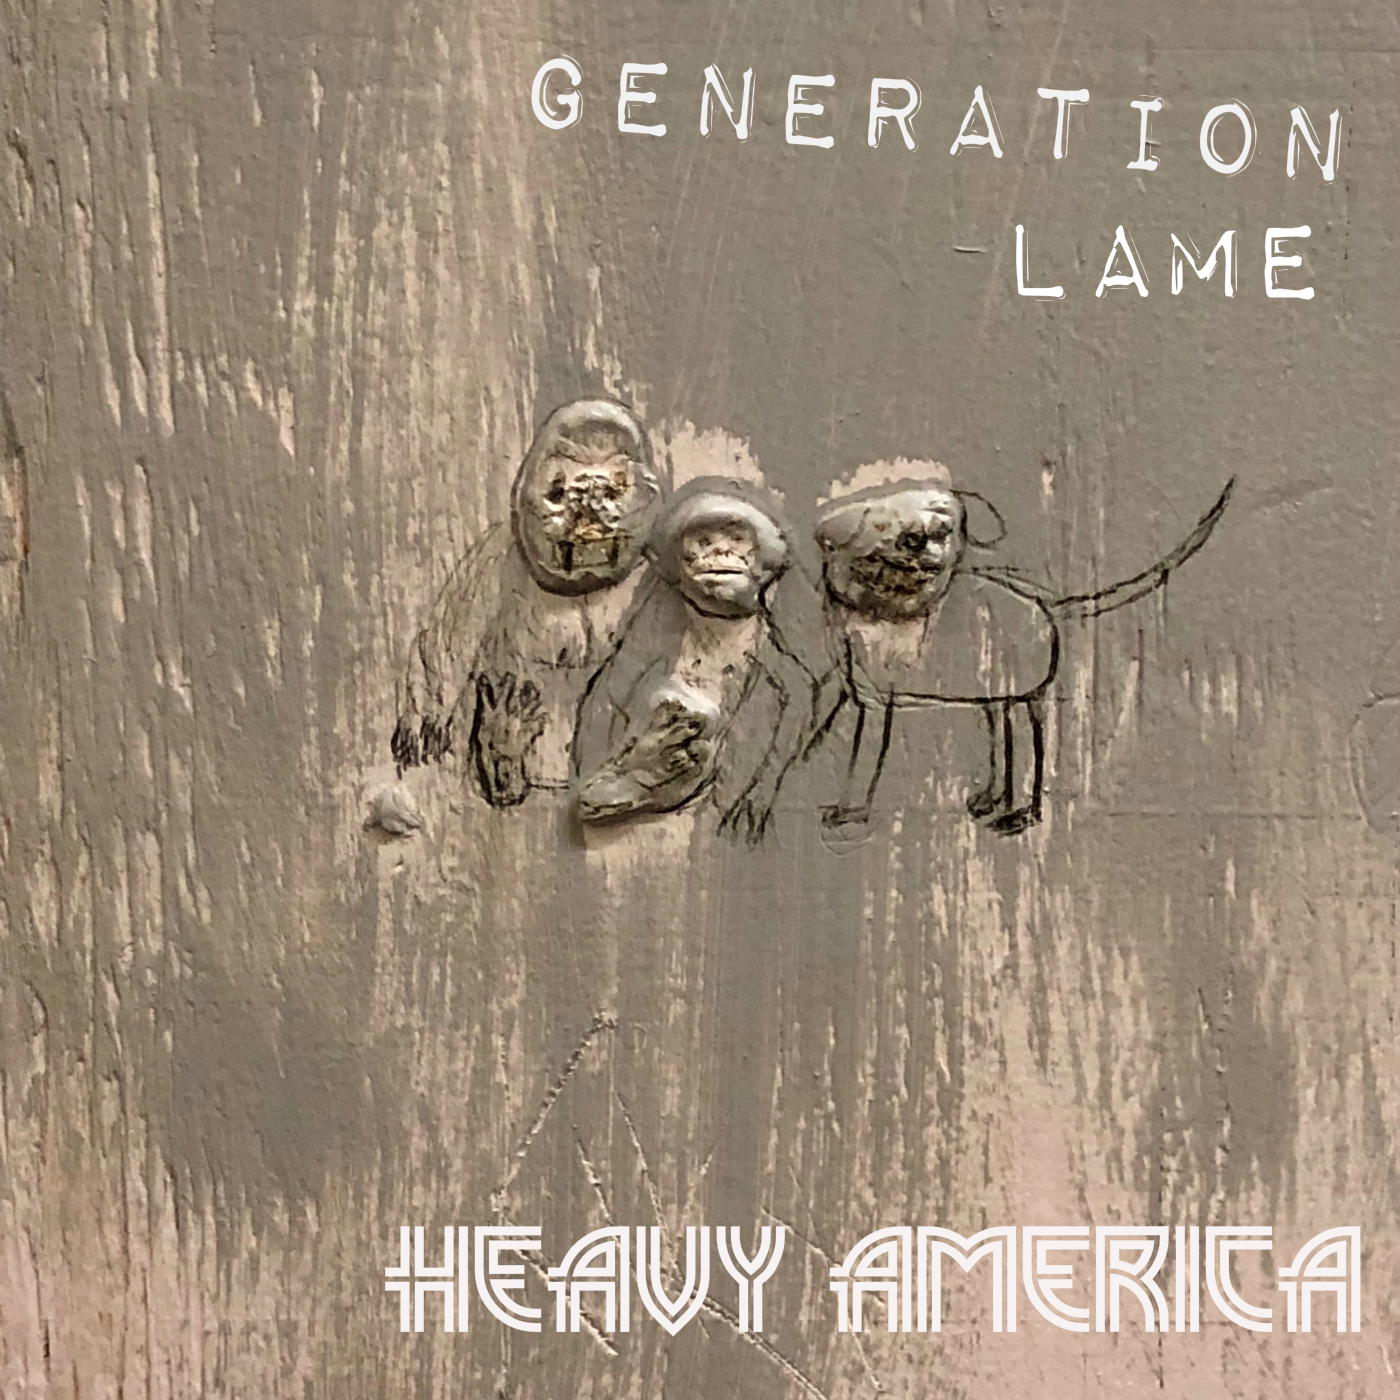 Heavy AmericA Tackles America’s Lack Of Unity In “Generation Lame”